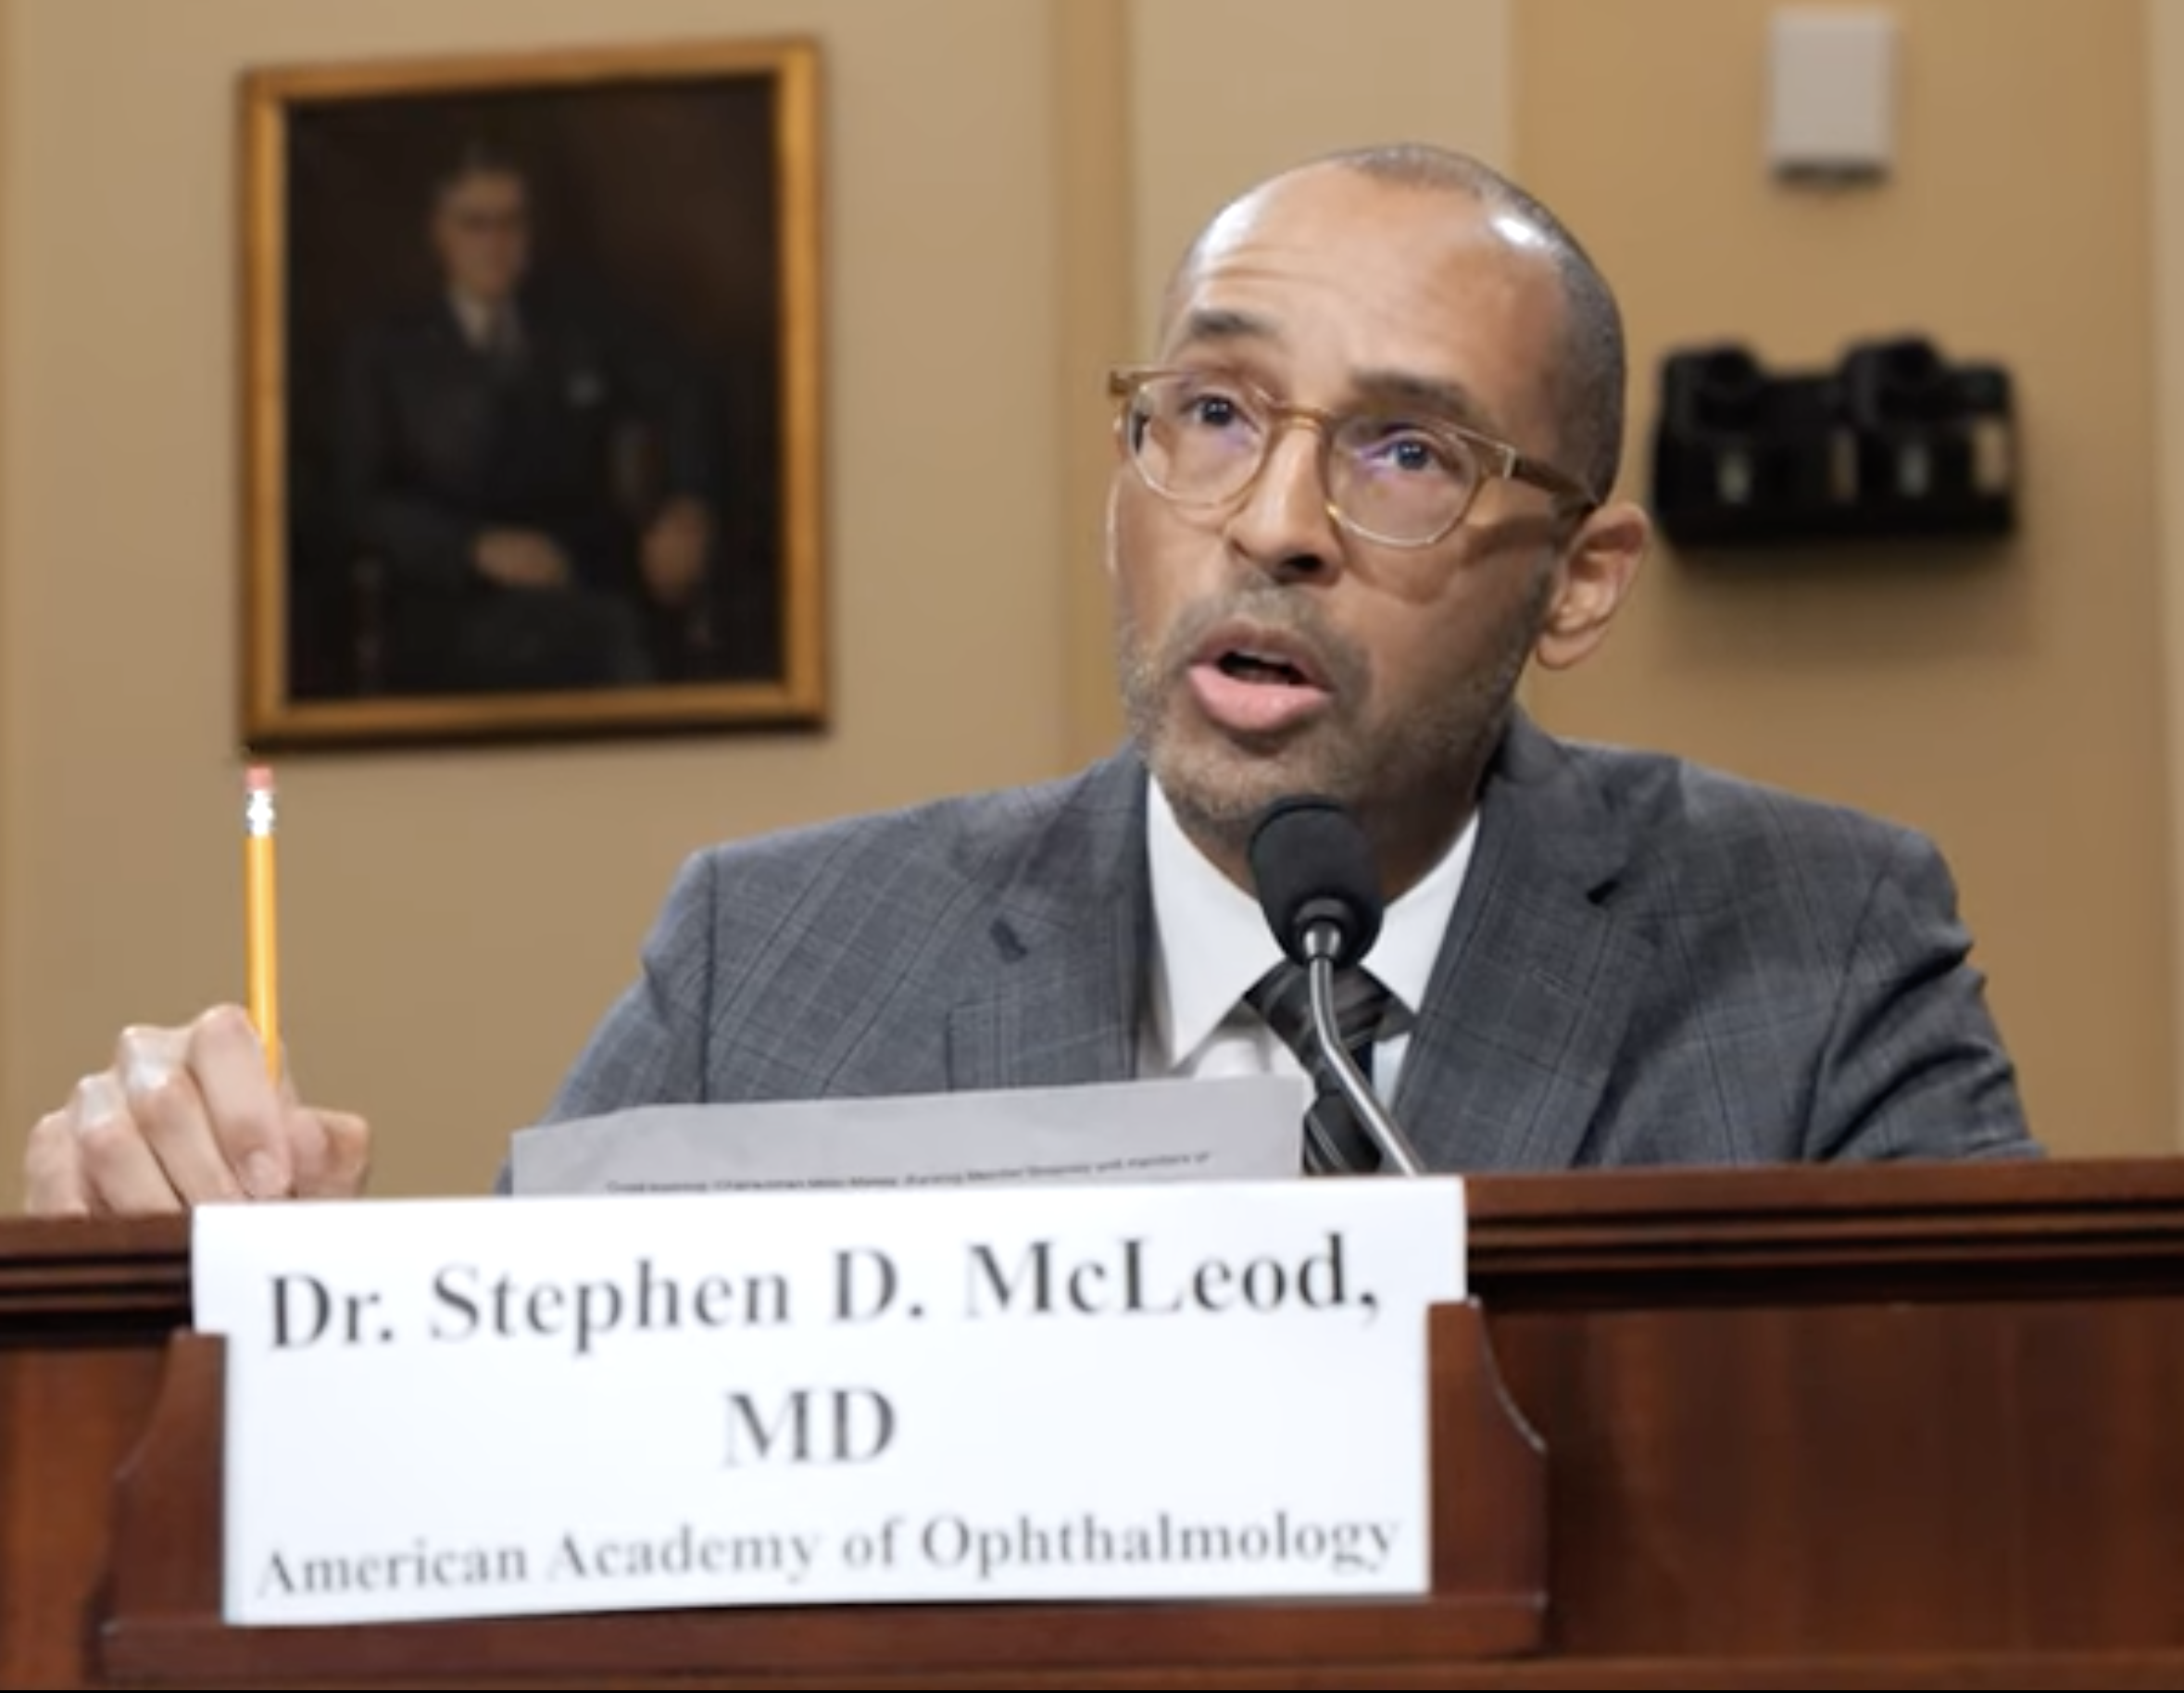 The Academy of Ophthalmology’s Stephen McLeod, MD, portrayed optometric training in advanced procedures as inherently flawed, evidence to the contrary notwithstanding.